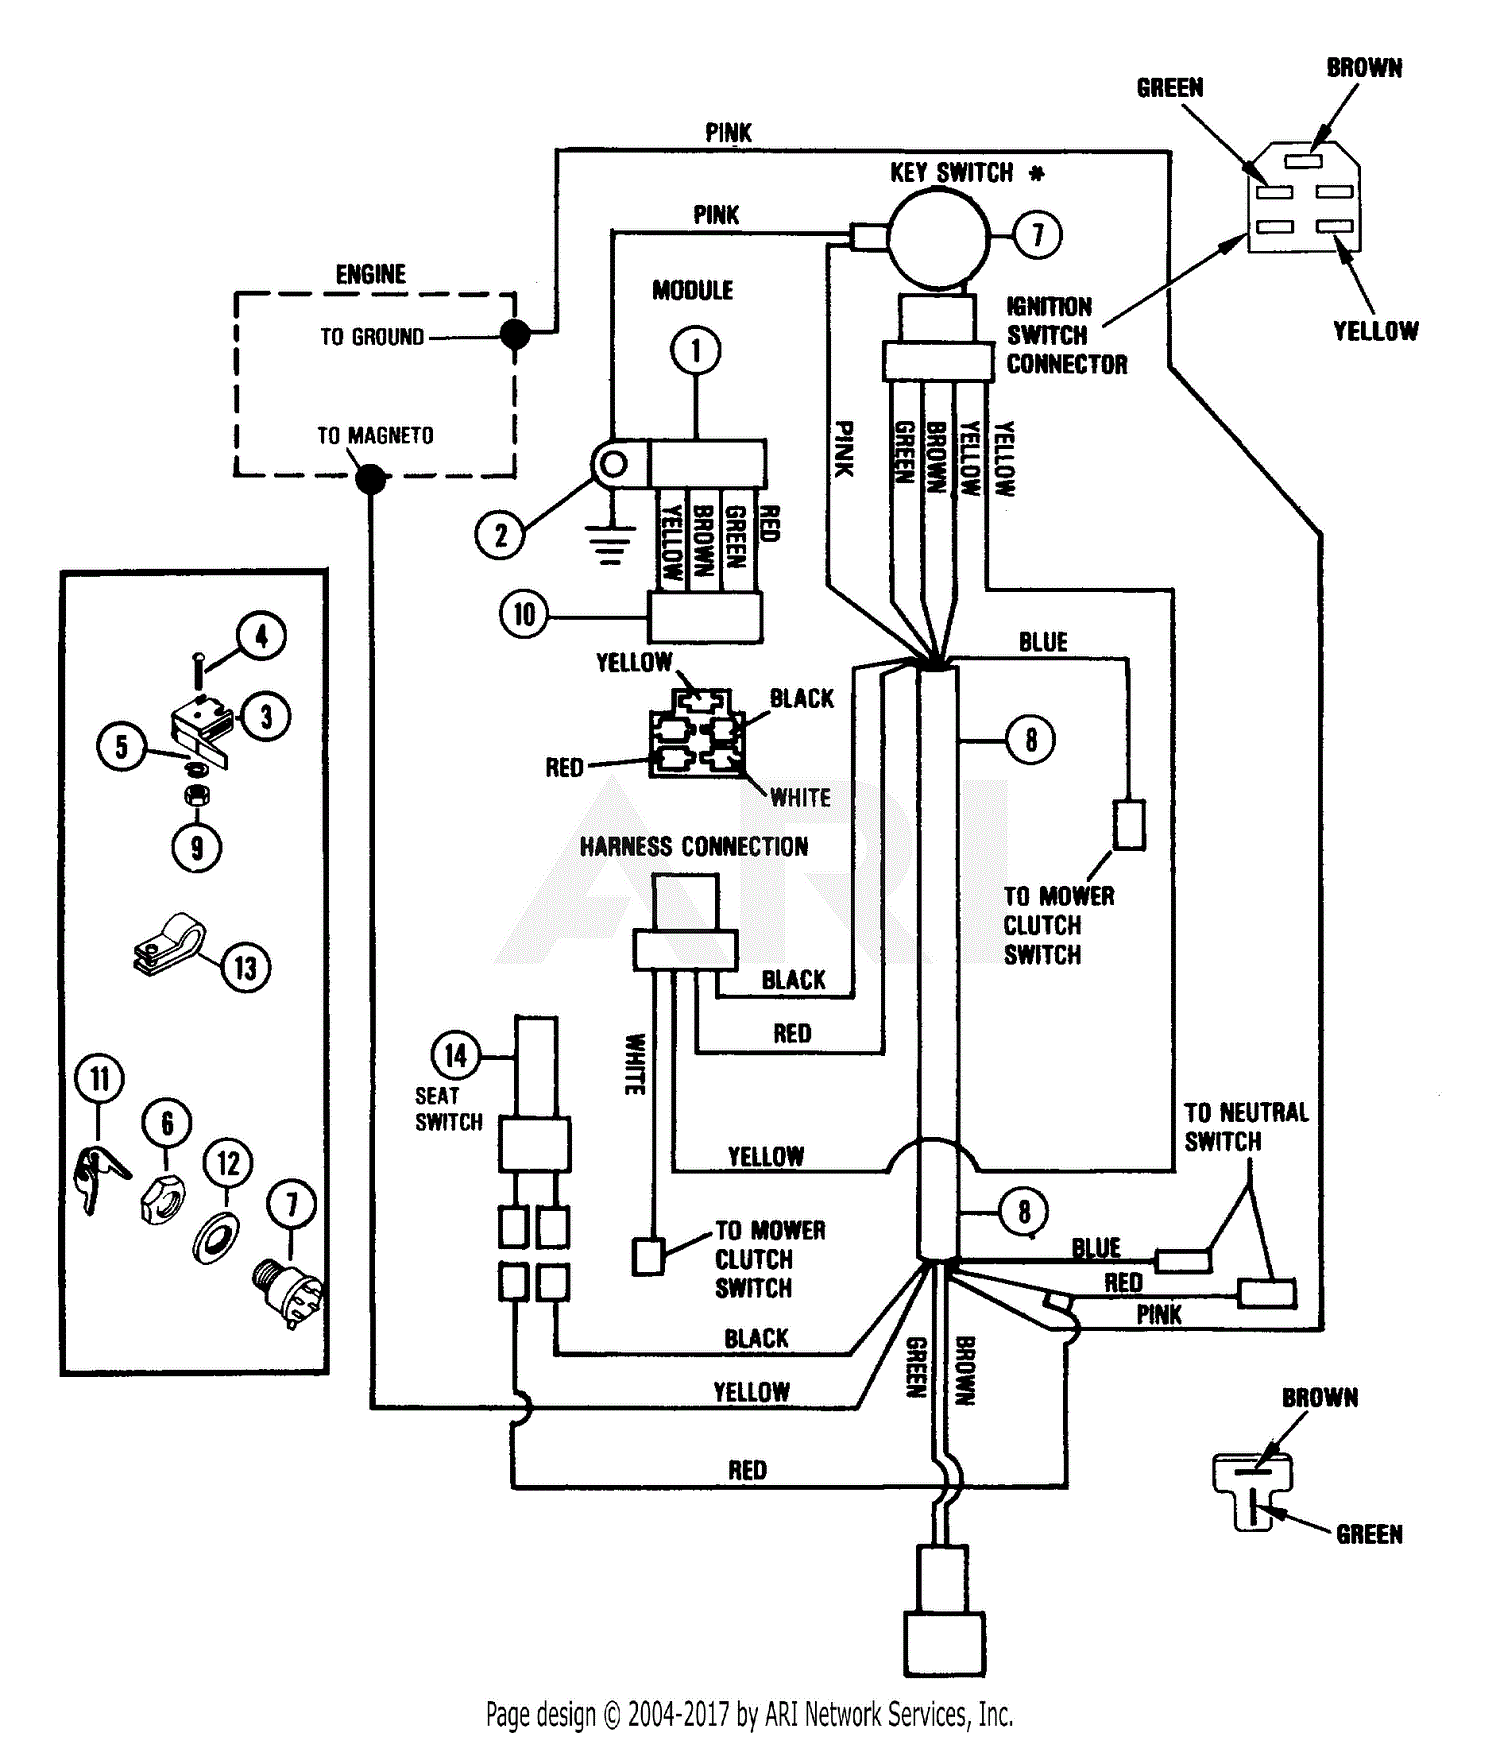 Tractor Ignition Switch Wiring Diagram from schematron.org